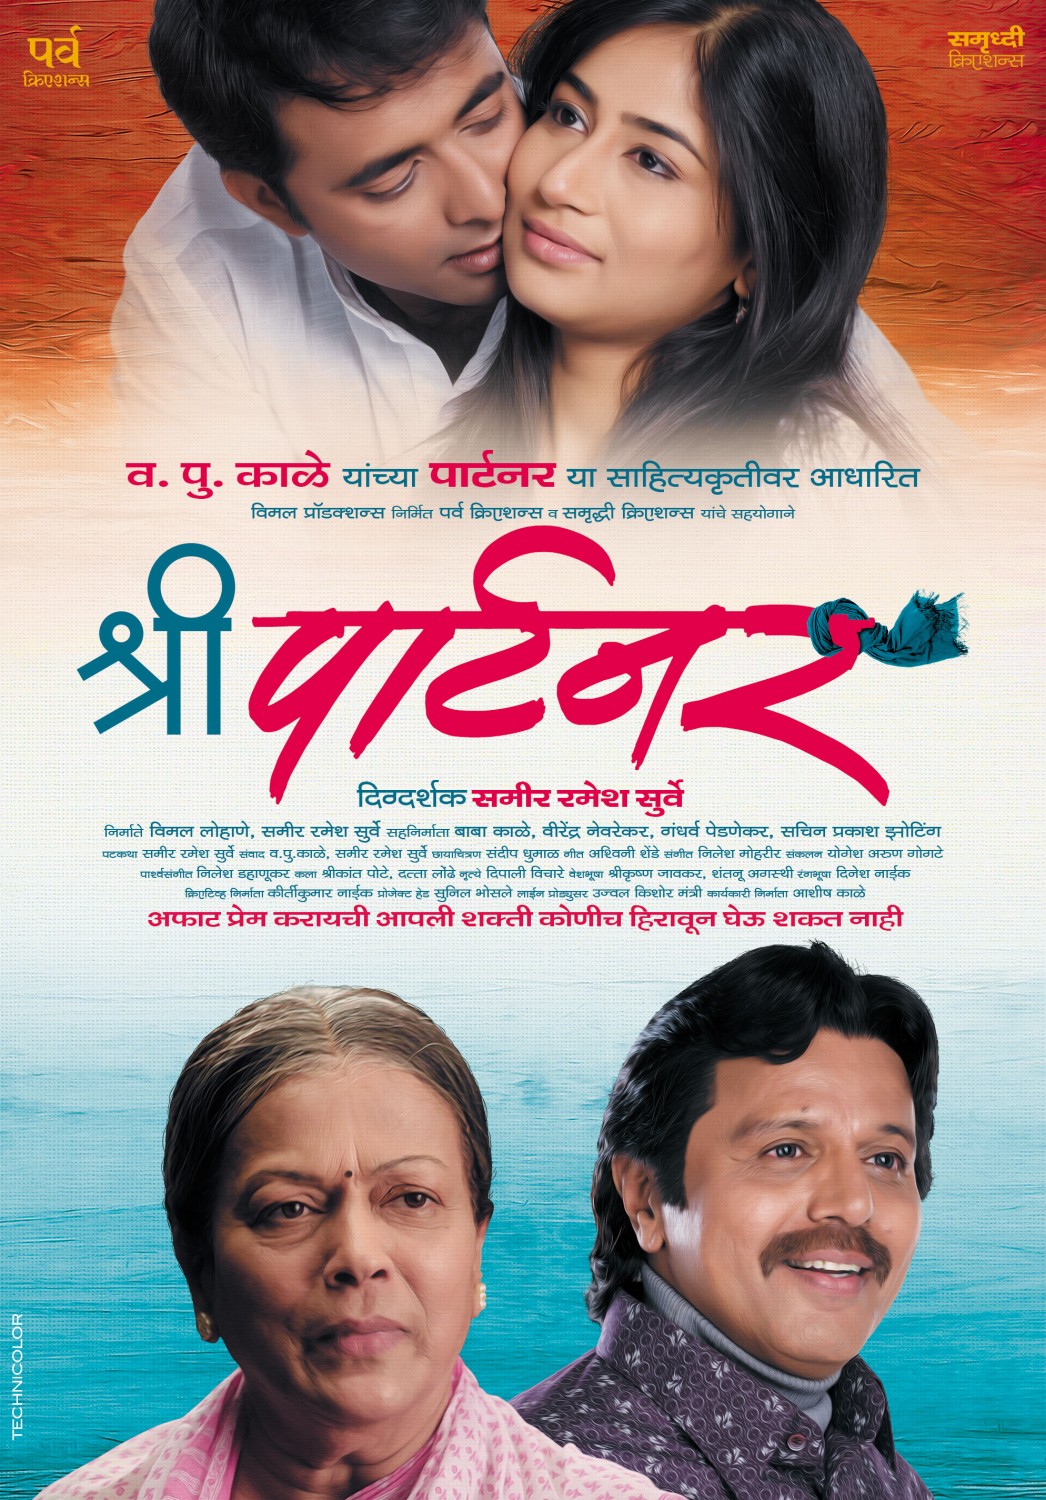 Extra Large Movie Poster Image for Shree Partner (#10 of 11)